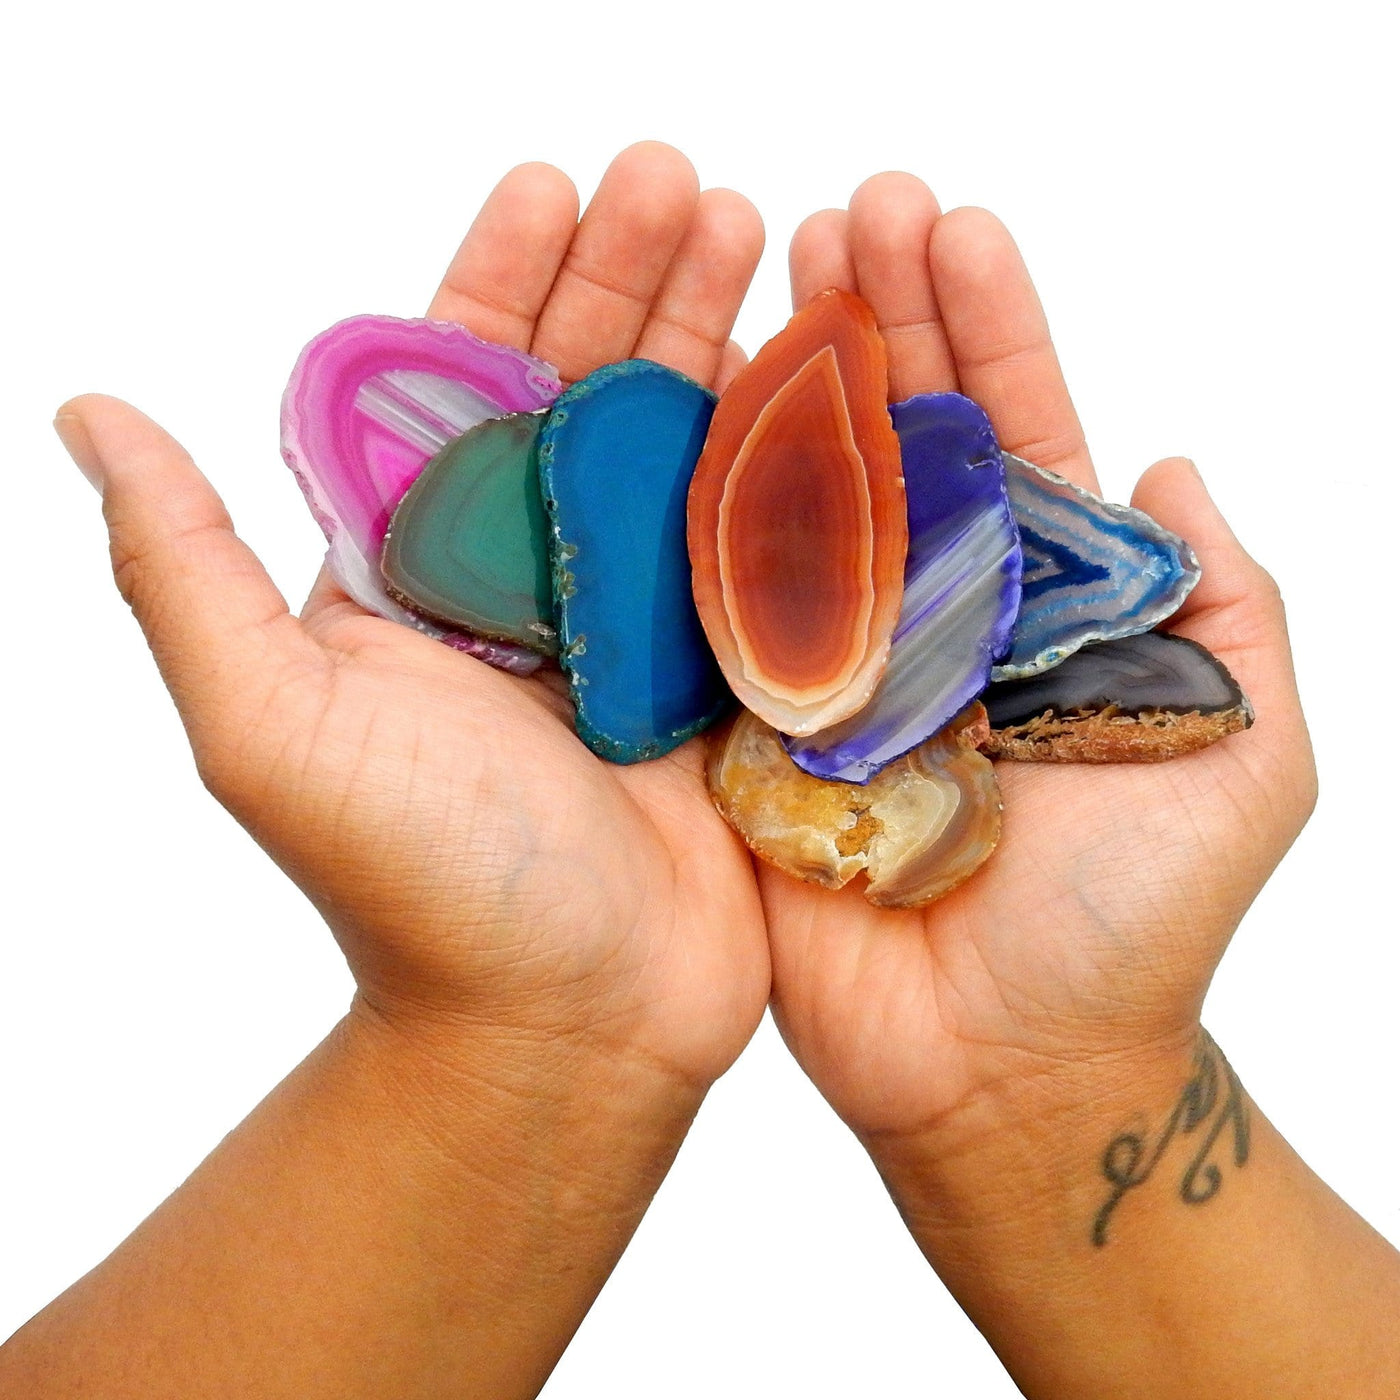 This Picture is showing all the variety of colors we have for our size 0 agate slices, also being displayed in hands. 